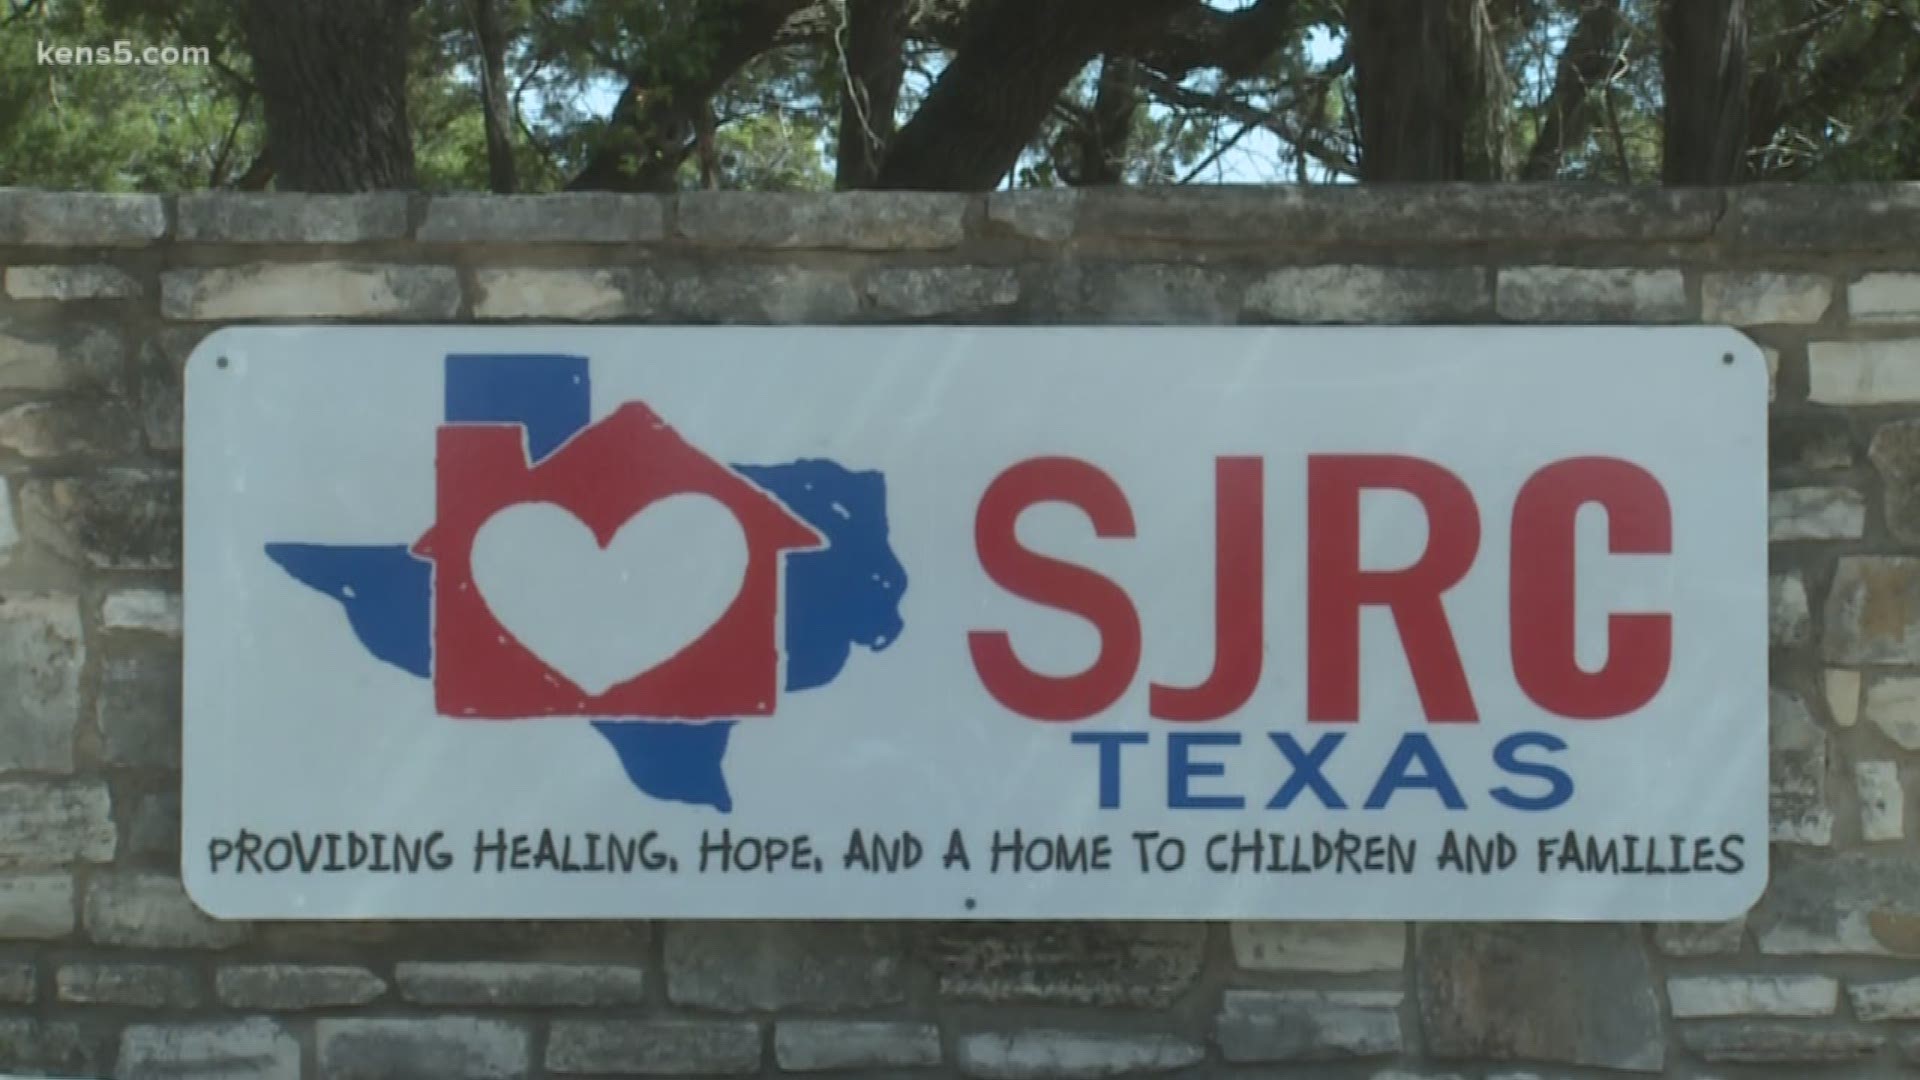 Saint Jude's Ranch does some amazing work, especially when it comes to foster children and adoptions. They're also there for children who have nowhere else to go.